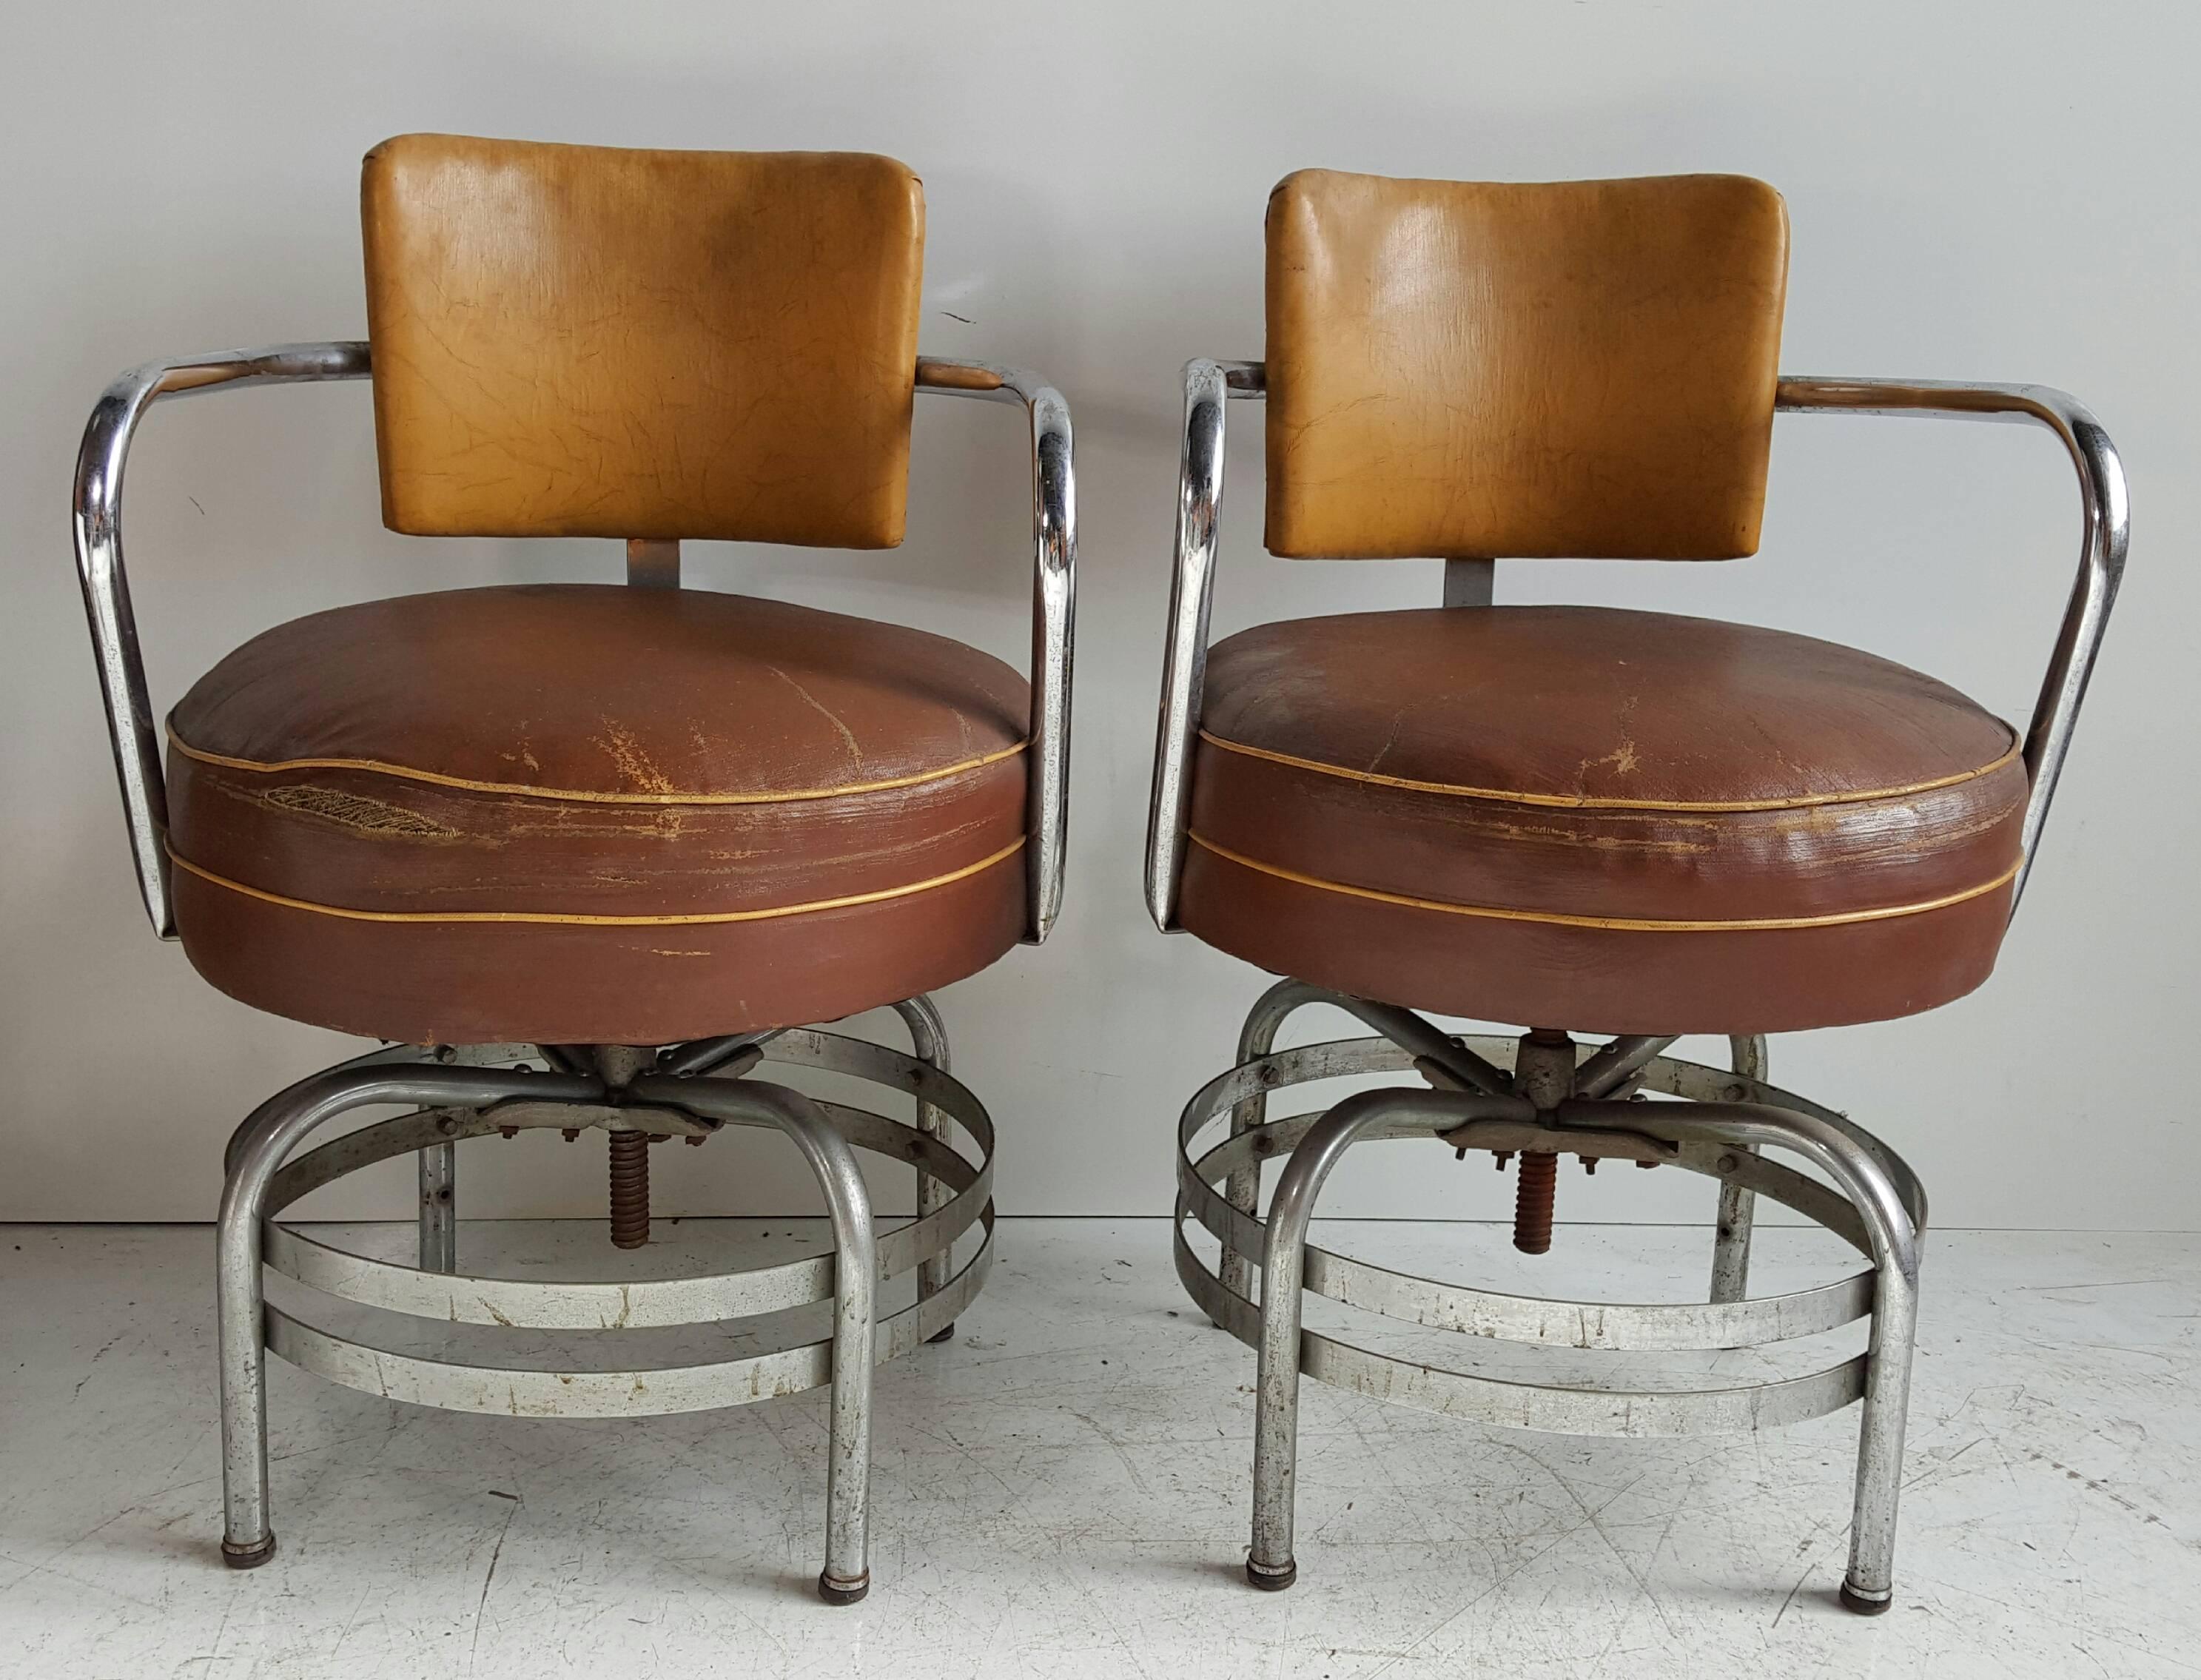 Classic 1930s American Art Deco / Machine Age tubular chrome swivel armchairs, amazing form, patina, all original, retain original oil cloth round seats, fit seamlessly into deco, modern, contemporary, eclectic environment.